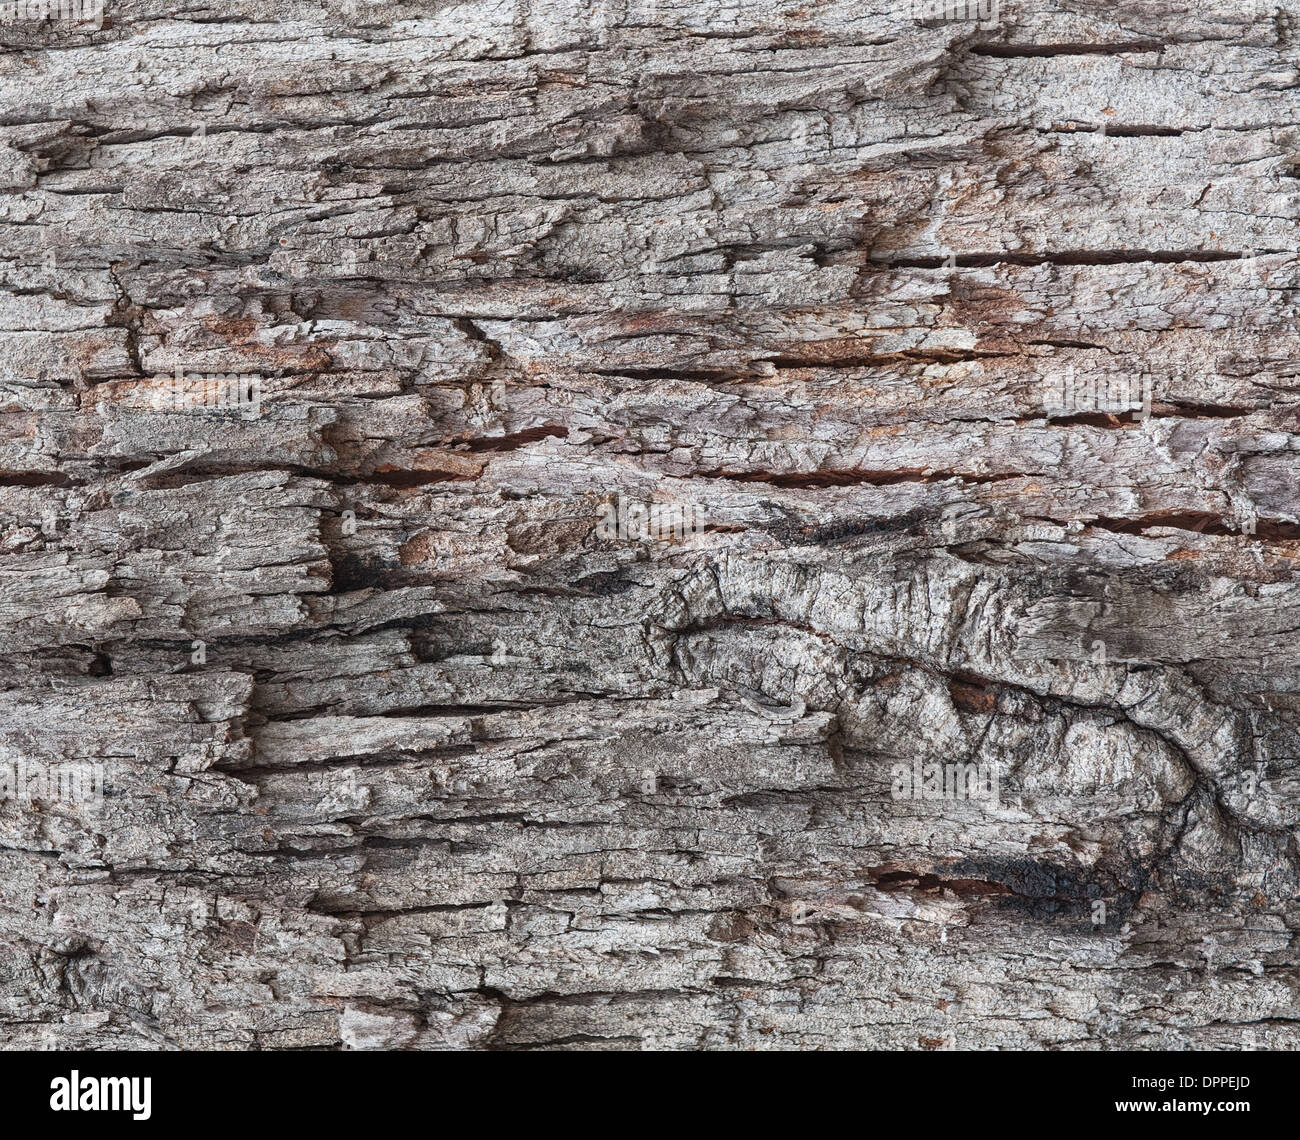 image of an old tree bark texture Stock Photo